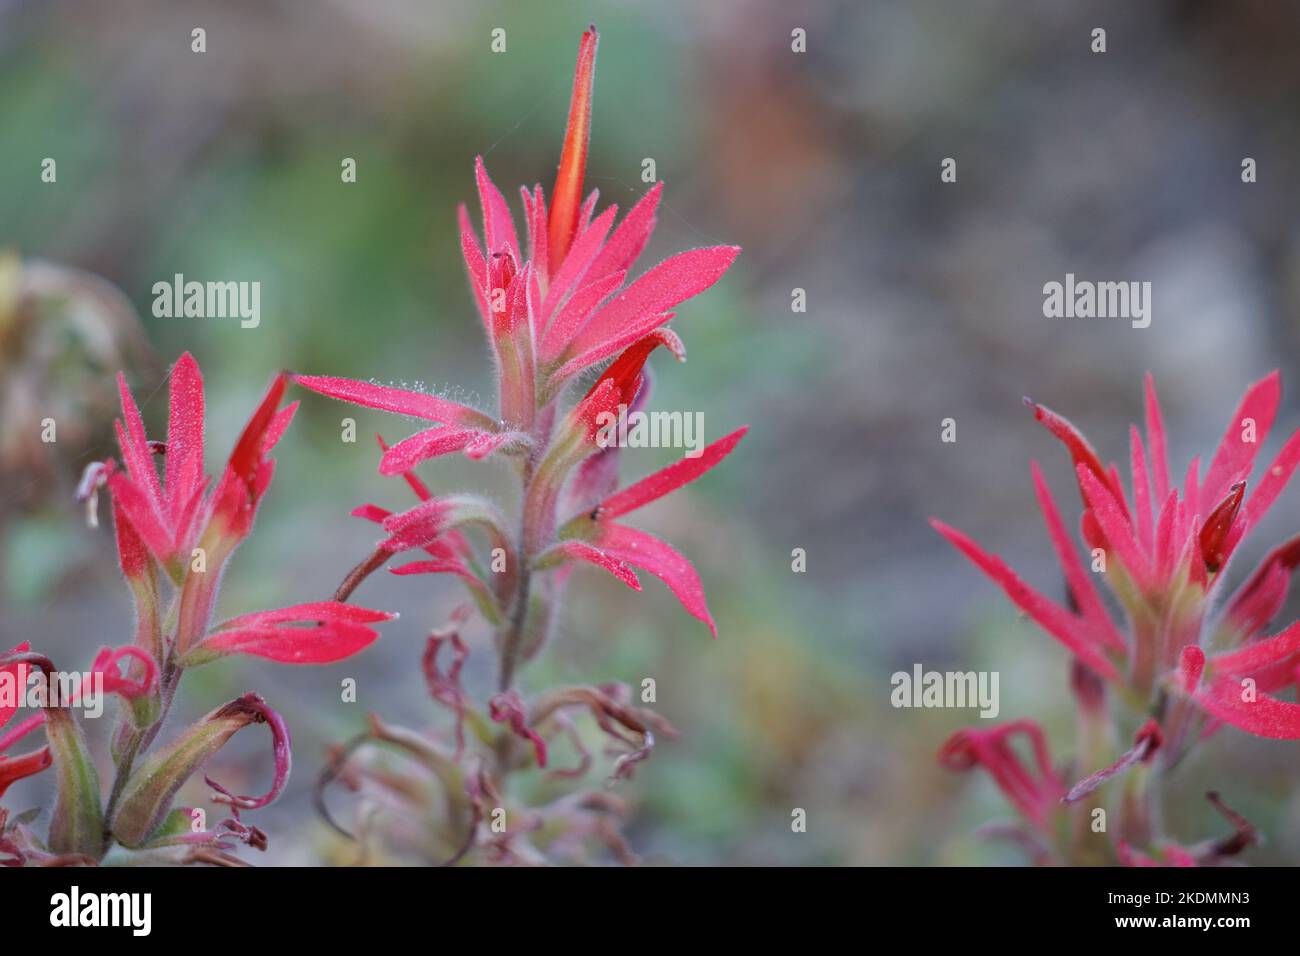 Red flowering racemose spike inflorescences of Castilleja Applegatei, Orobanchaceae, native perennial herb in the San Emigdio Mountains, Autumn. Stock Photo